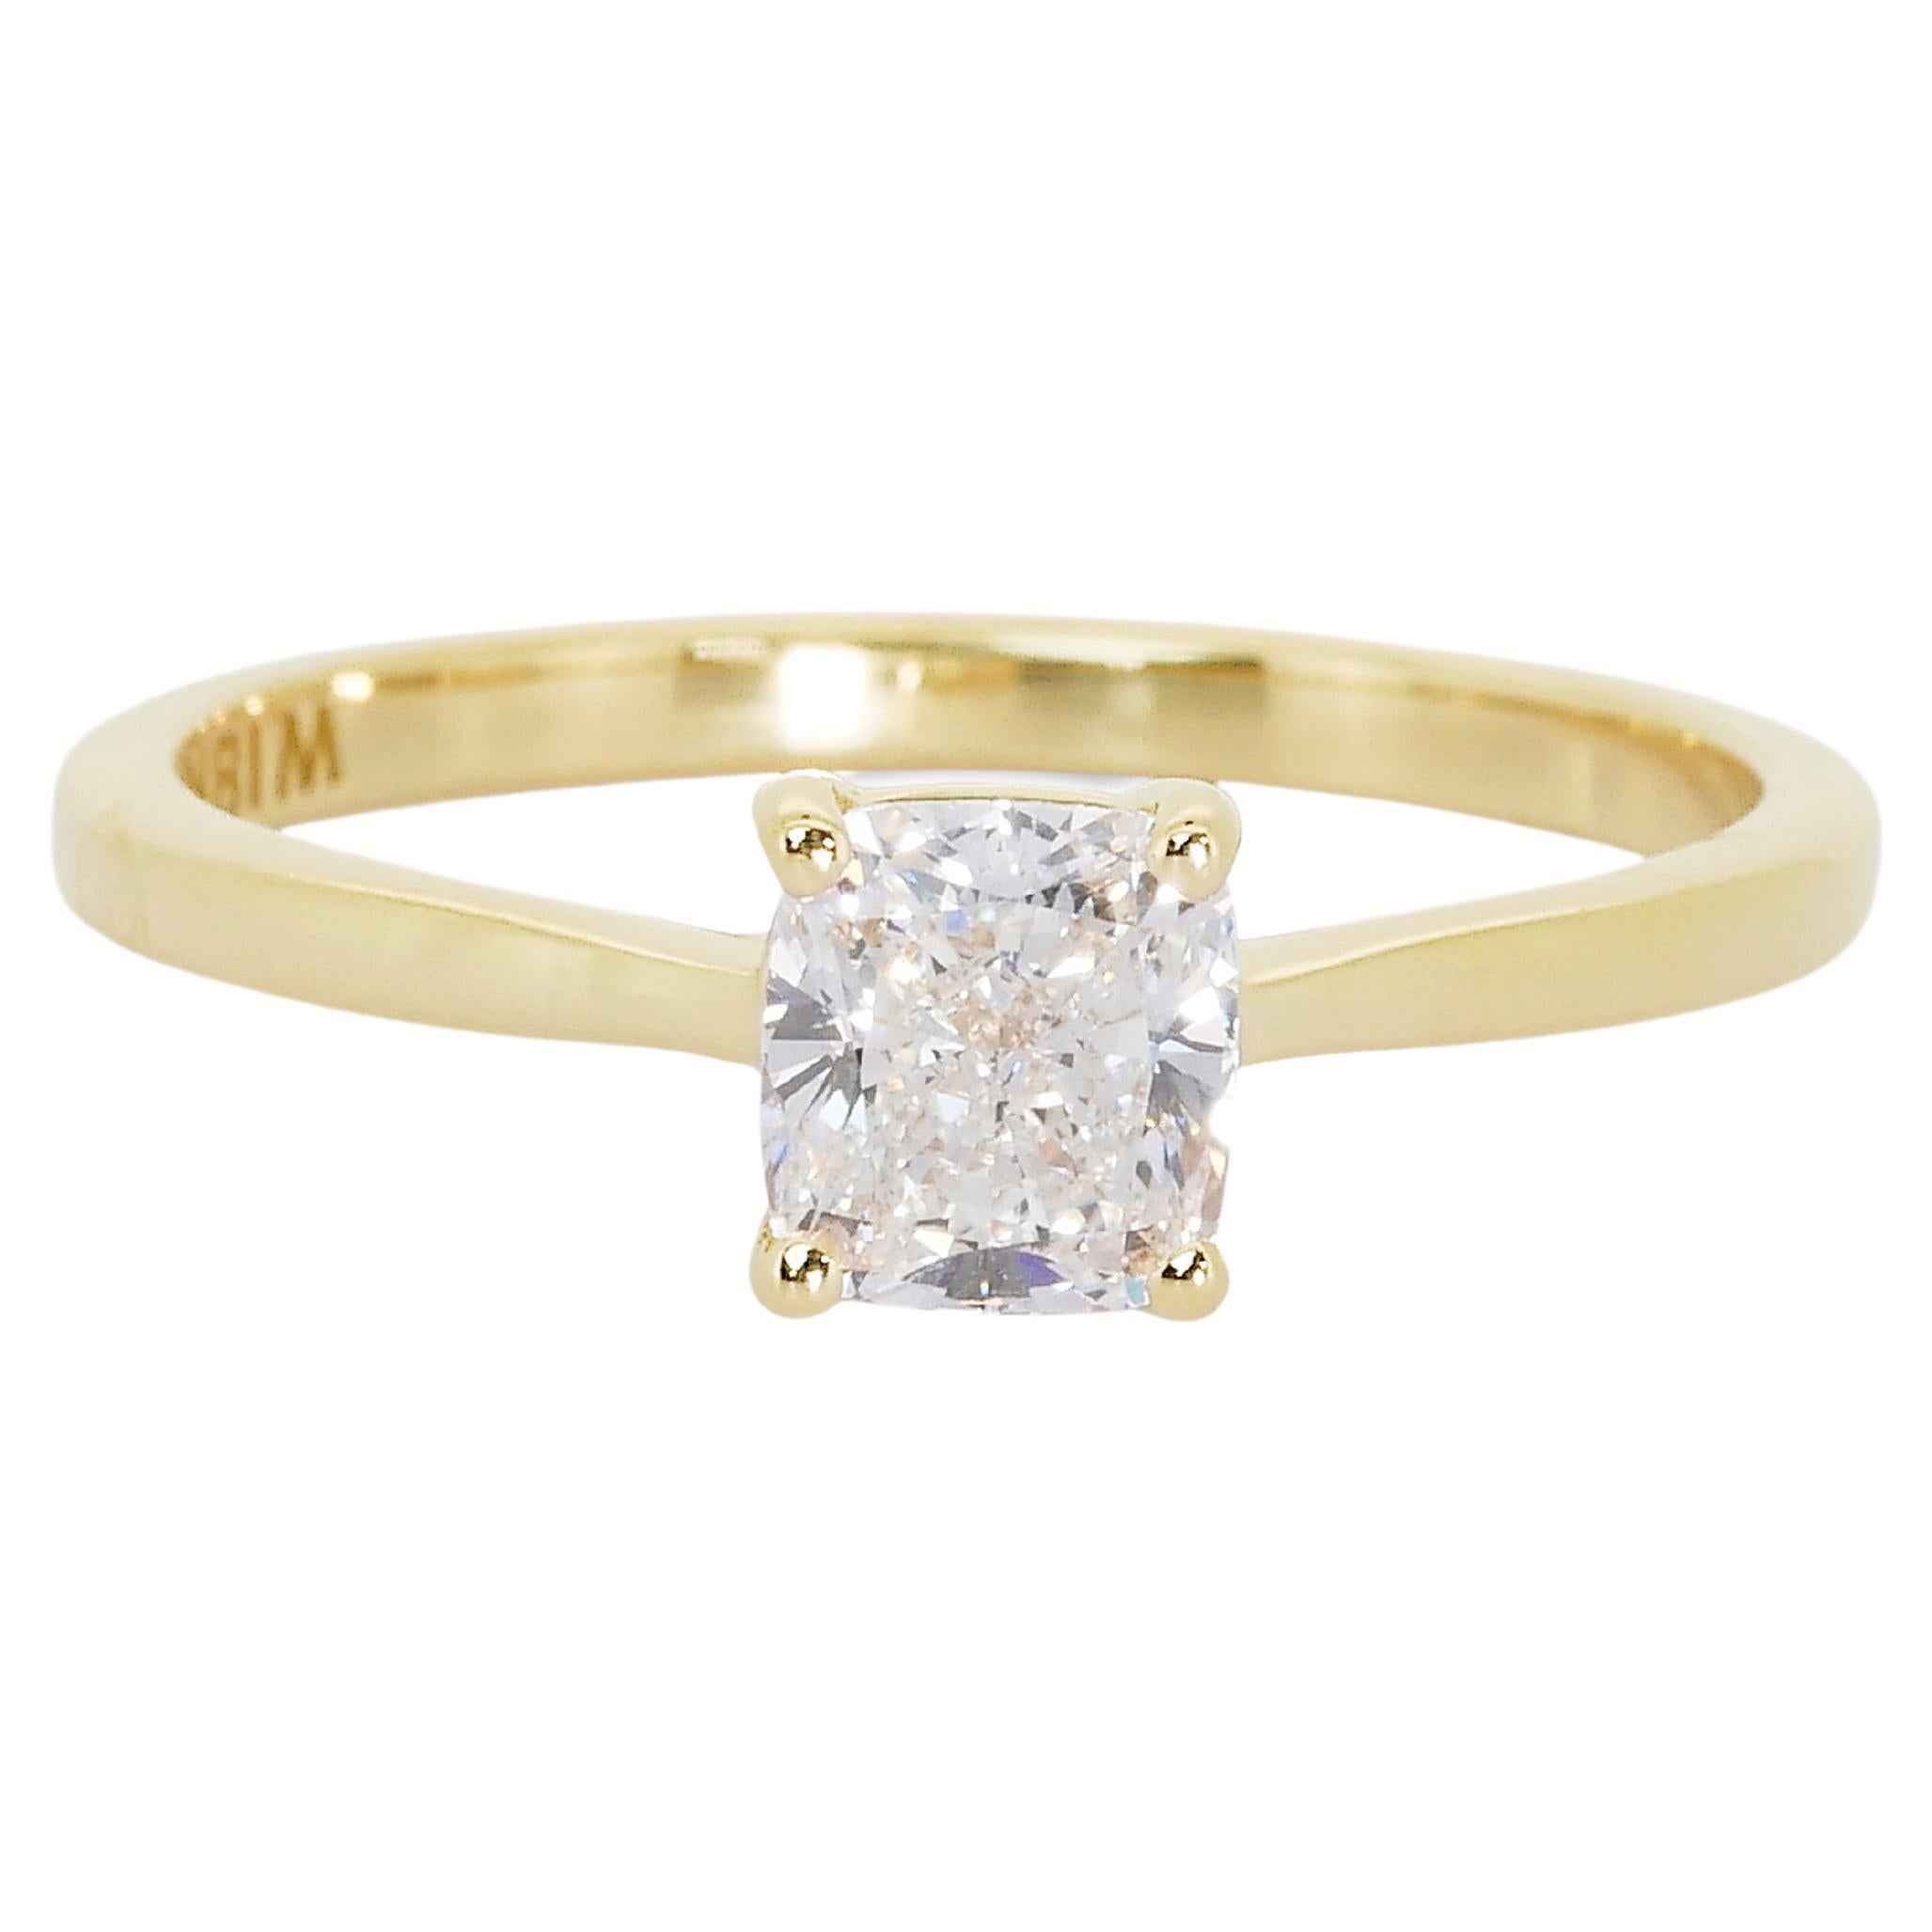 Glamorous 18k Yellow Gold Solitaire Ring w/ 0.80 ct Natural Diamonds IGI Cert For Sale